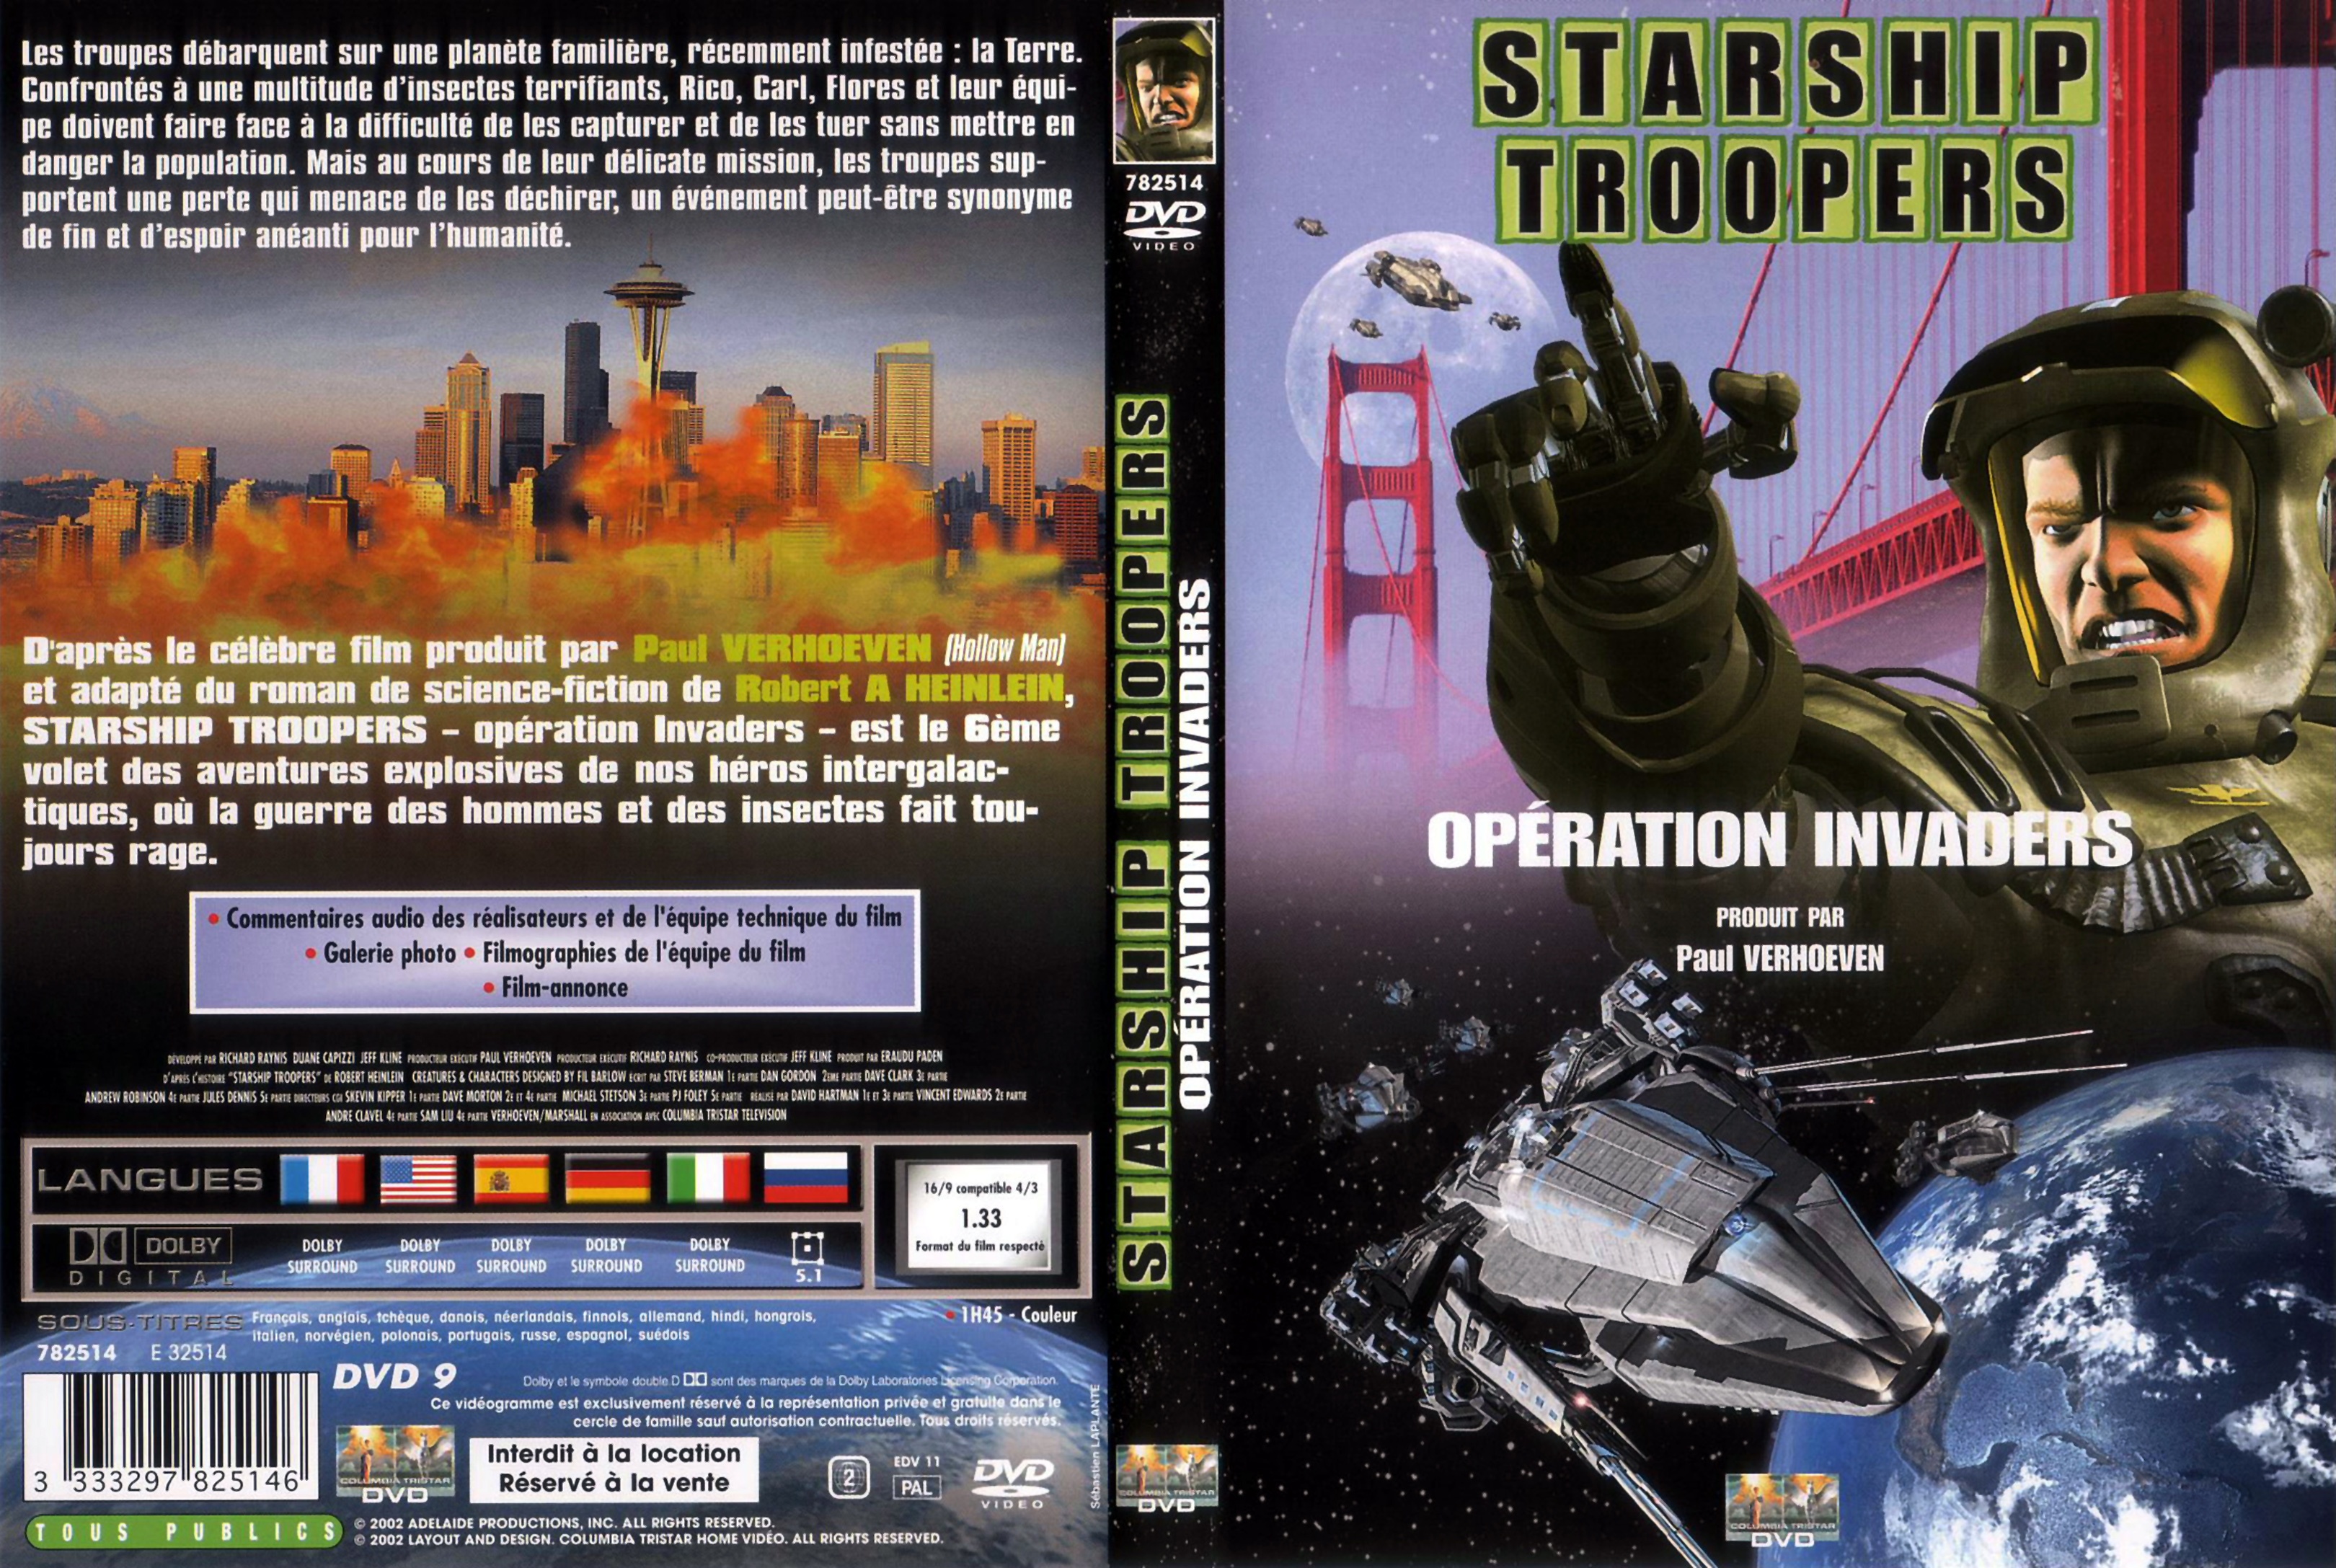 Jaquette DVD Starship troopers operation invaders